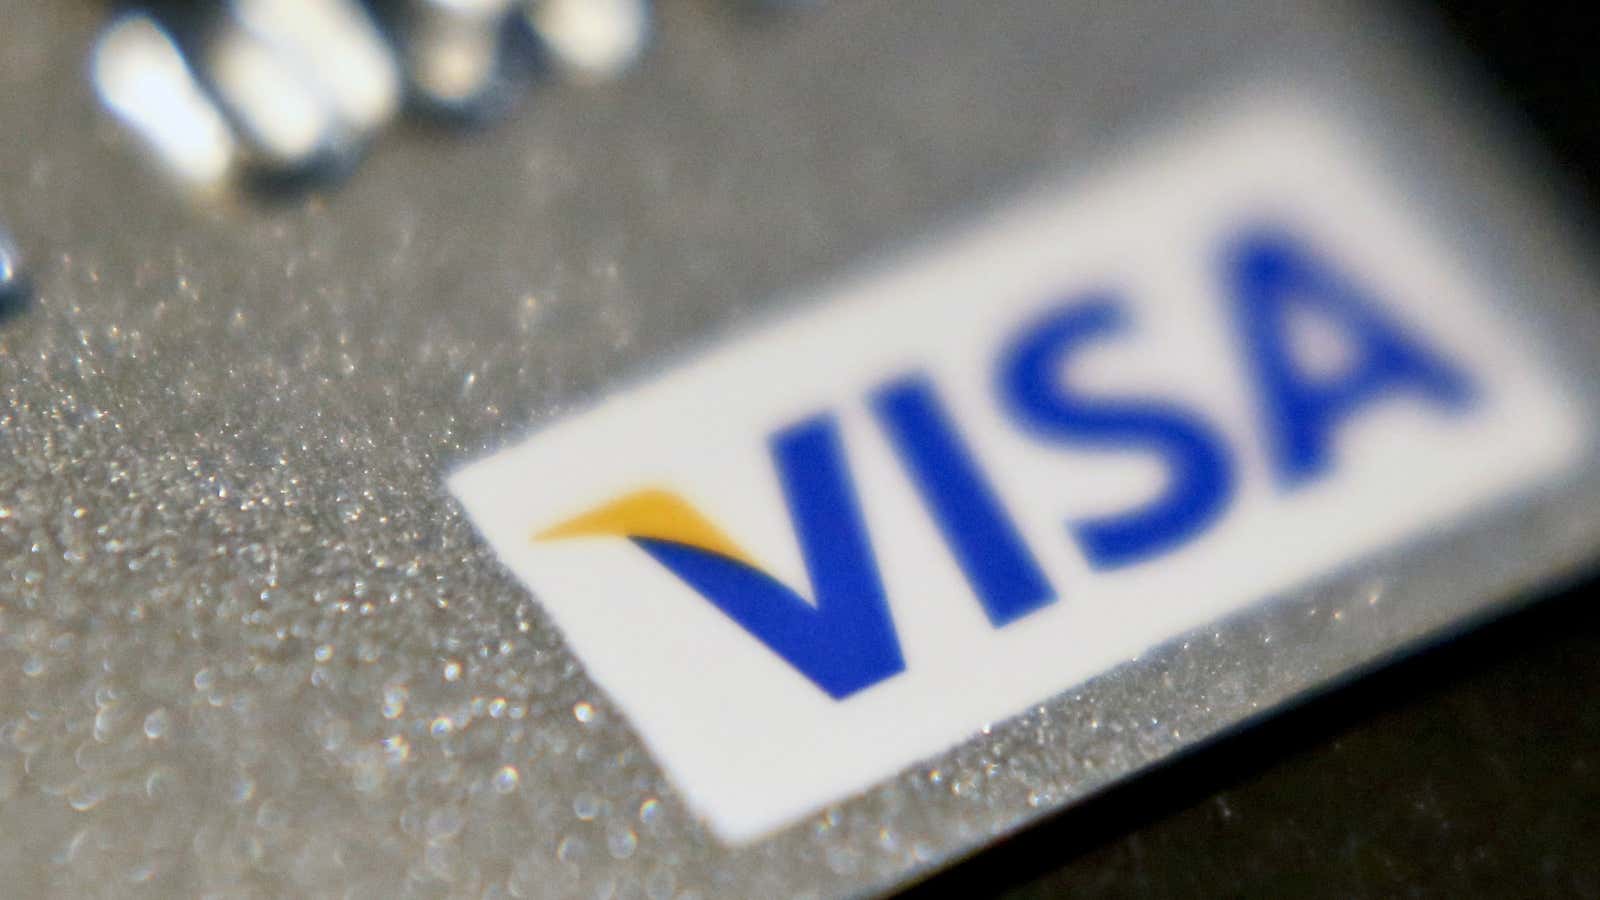 Visa and Mastercard will outlive plastic.